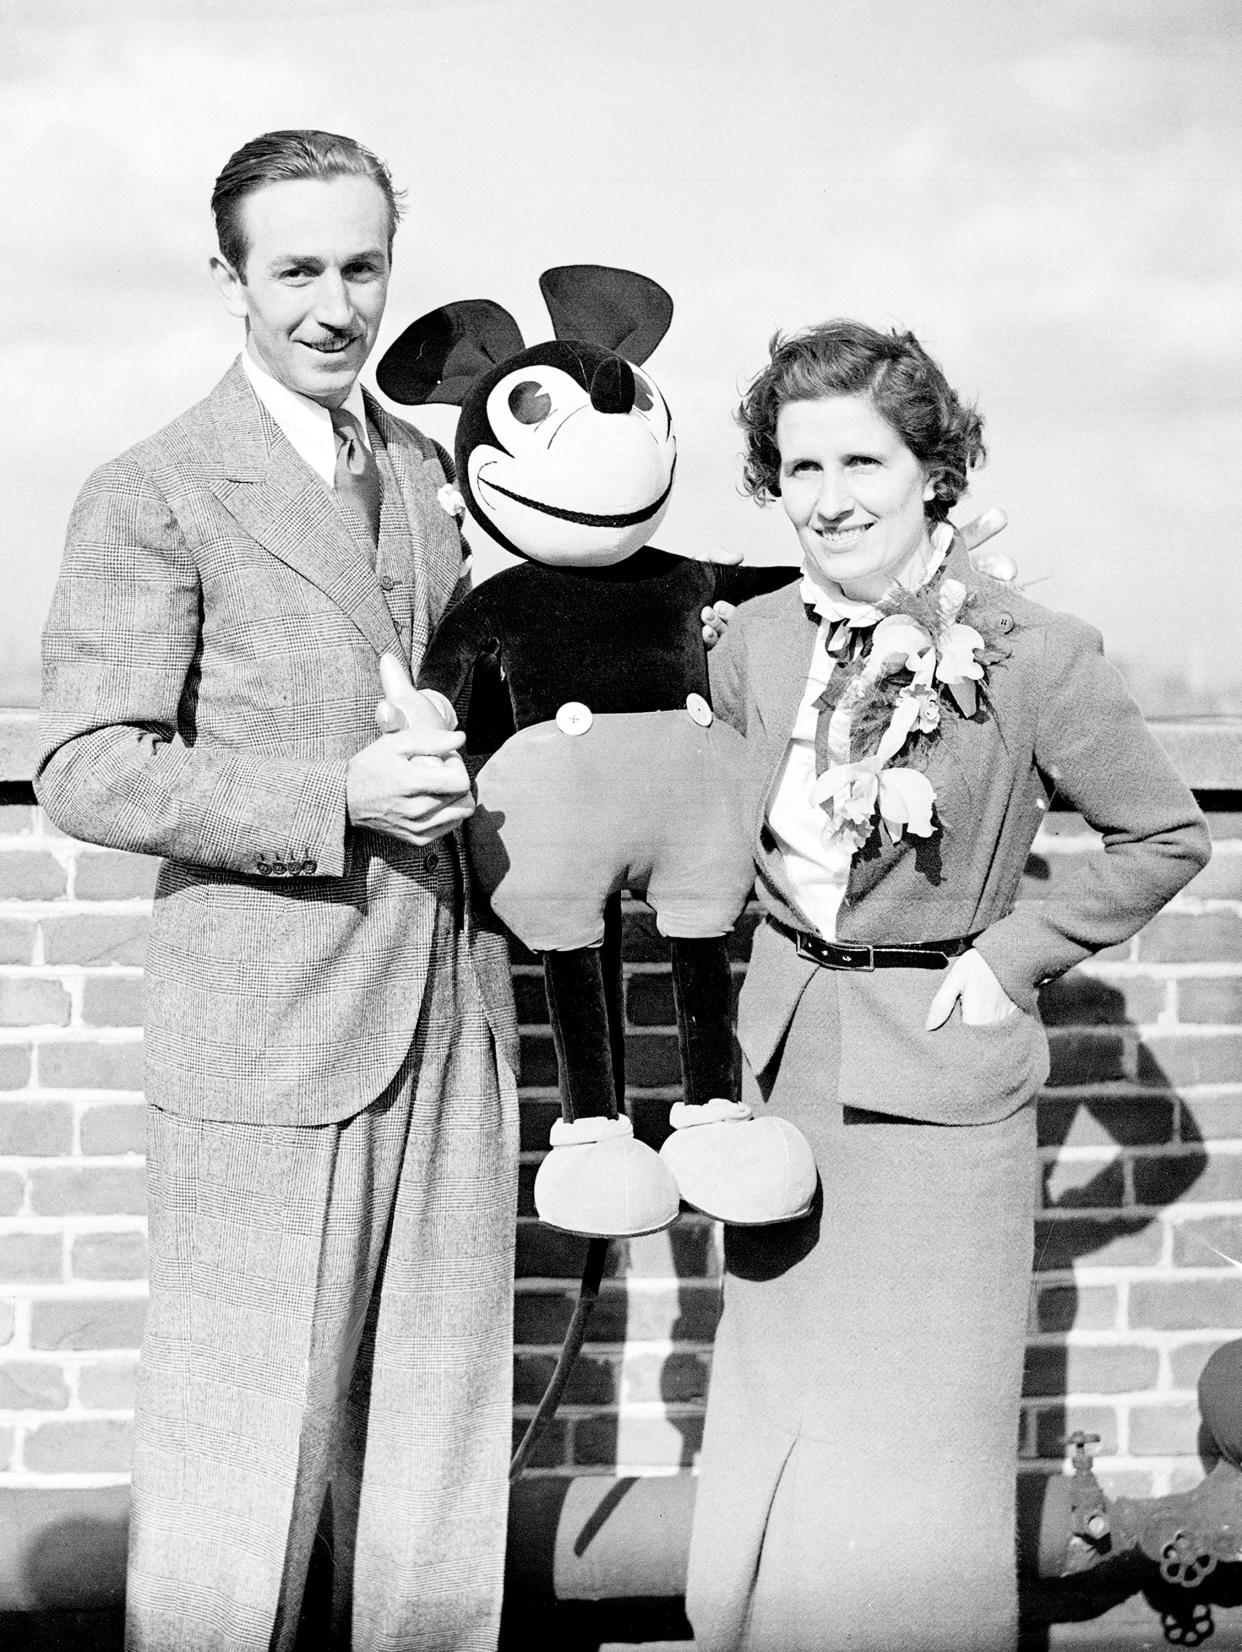 Along with Mickey Mouse, Walt Disney had one of his earliest successes with the 1929 short "Skeleton Dance." Here he is with his wife Lillian.